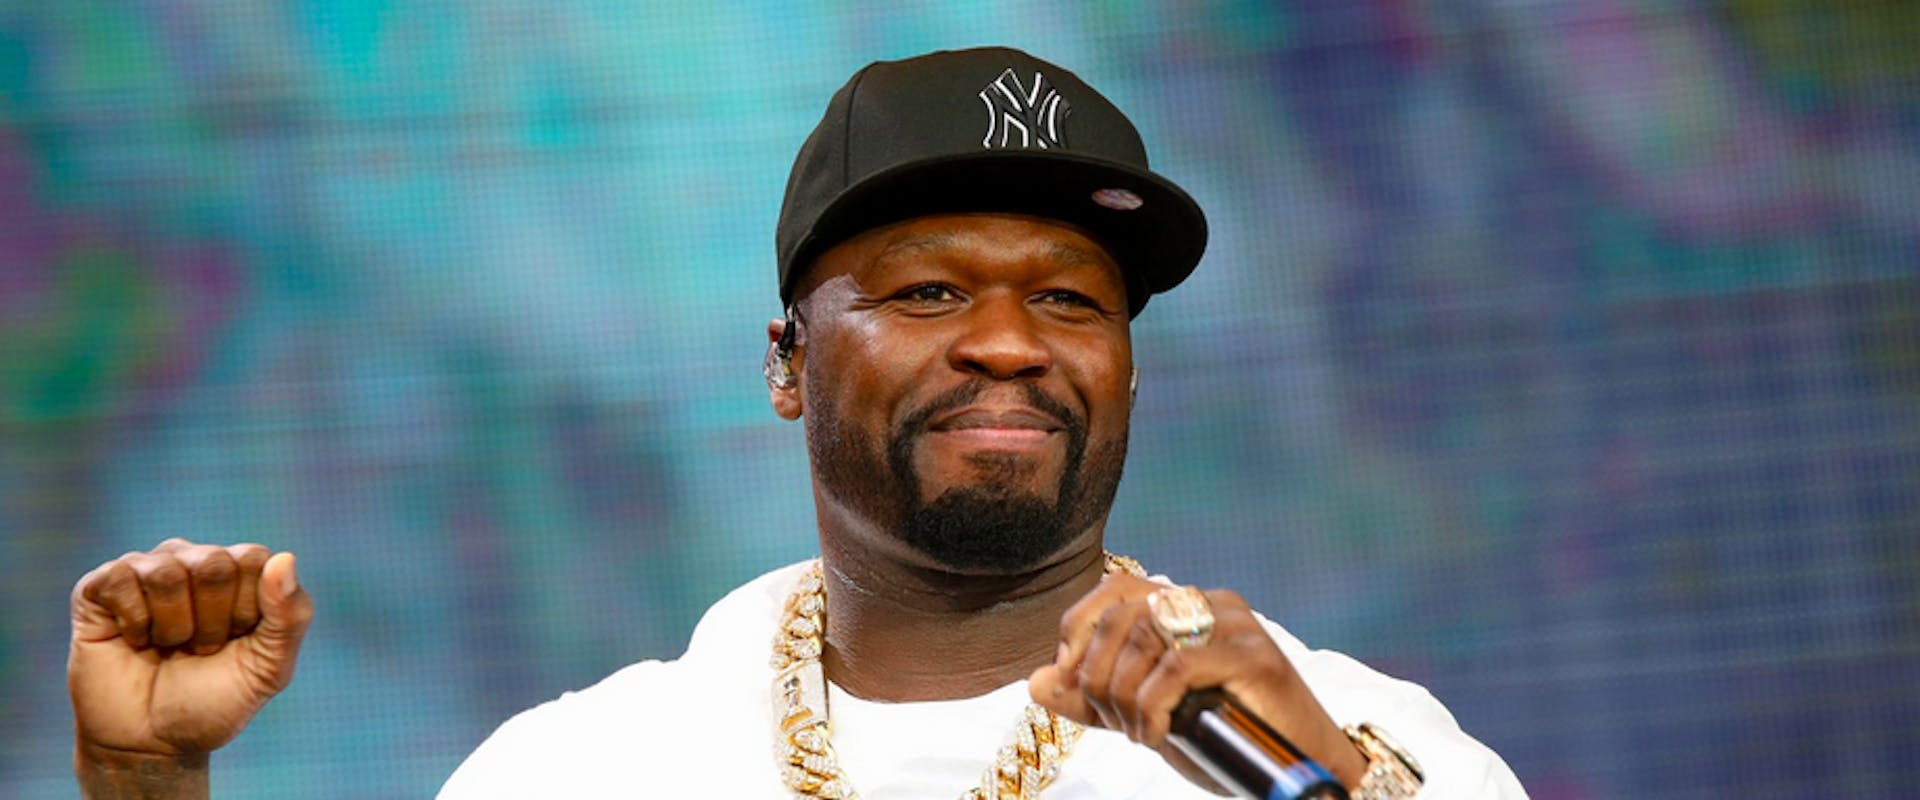 AUCKLAND, NEW ZEALAND - NOVEMBER 17: 50 Cent performs during Friday James Live 2019 at Western Springs Stadium on November 17, 2019 inAuckland, New Zealand